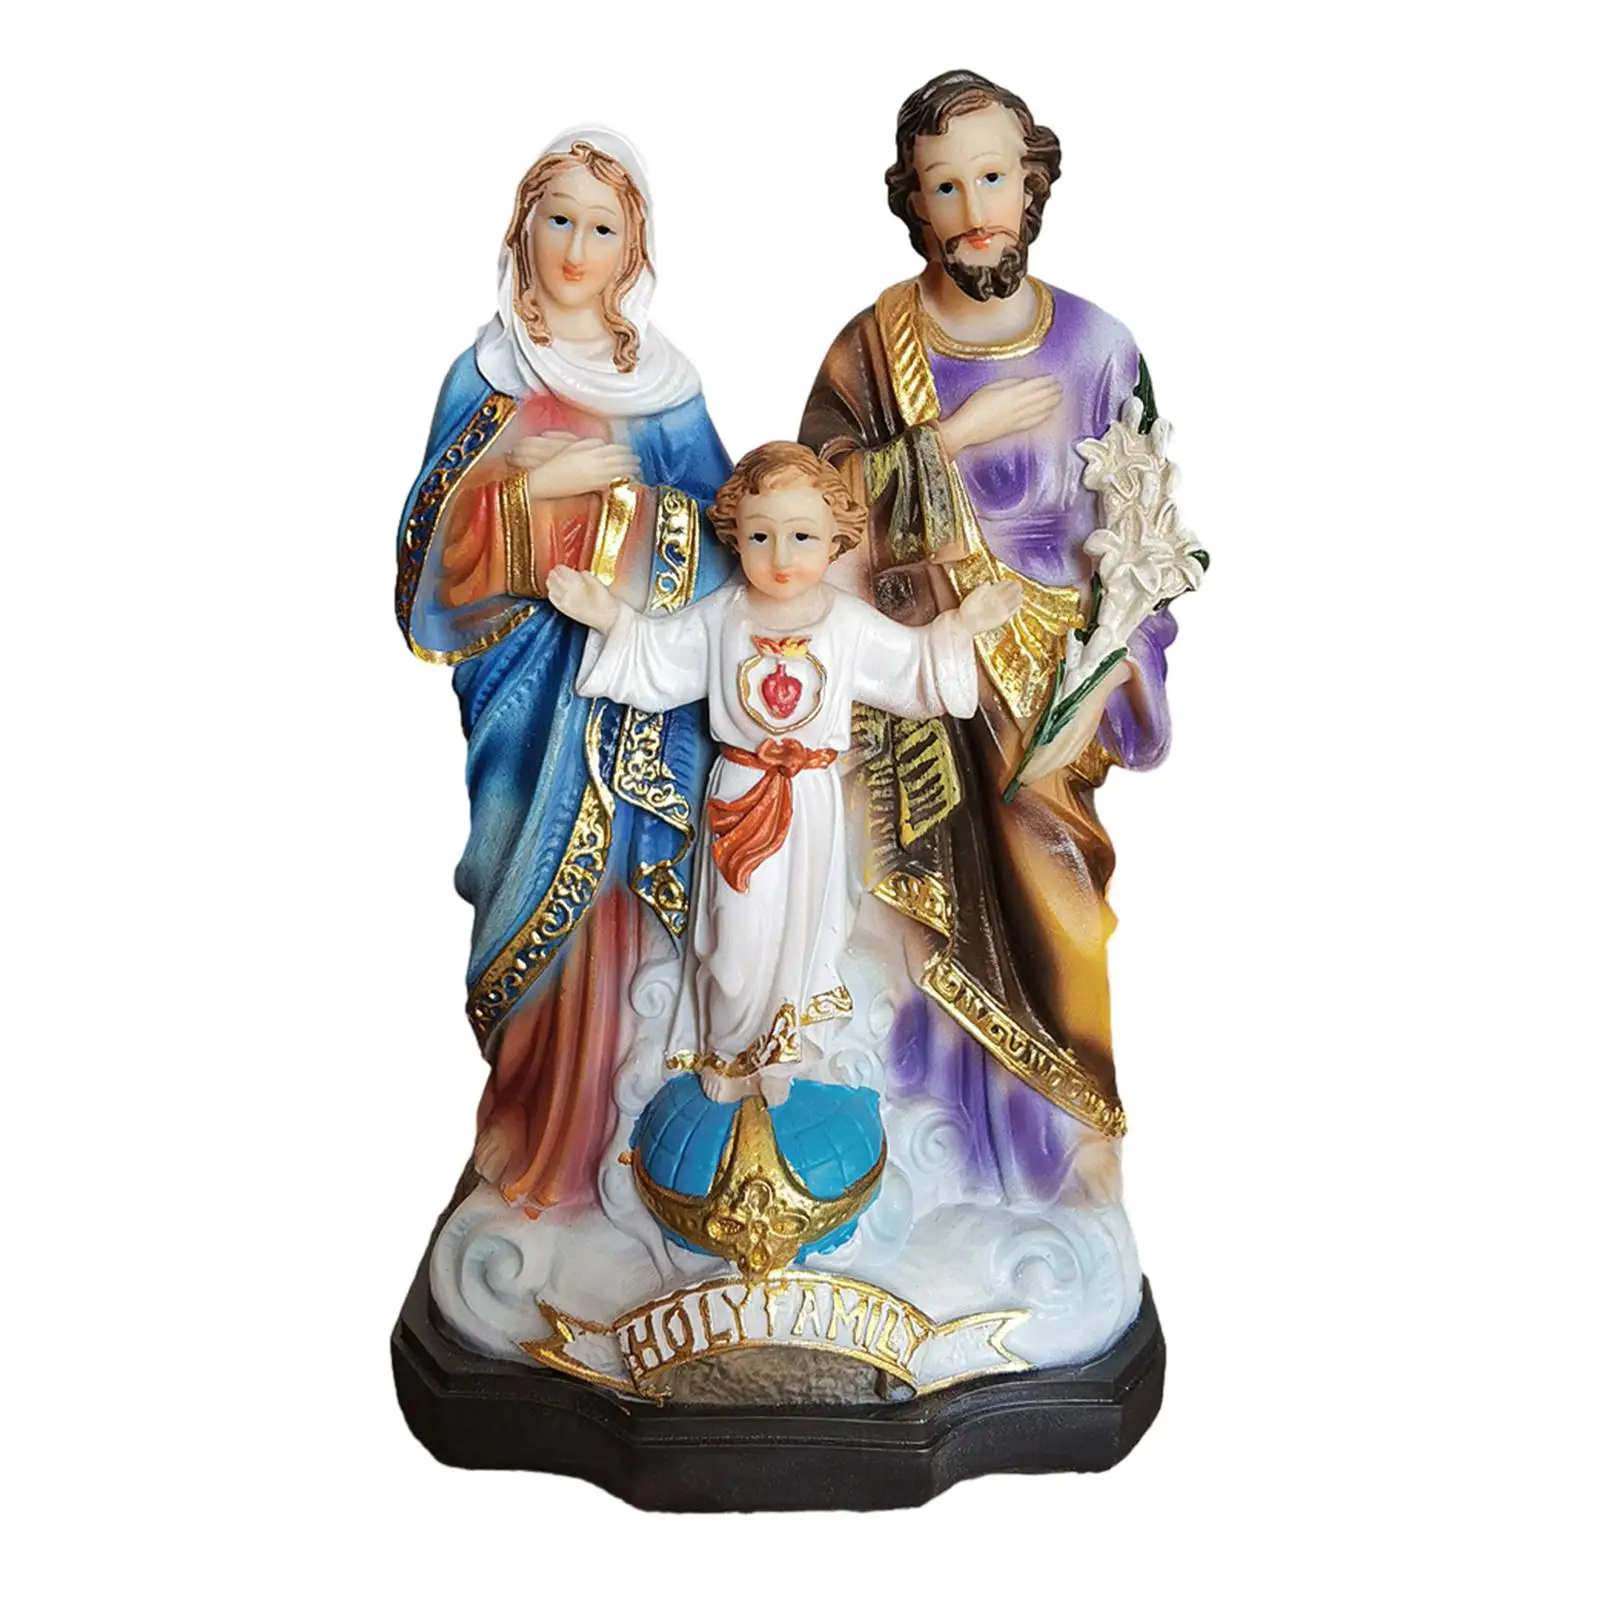 Holy Family Figure Holy Family Figures Decor, Resin Traditional Crafts Religious Gift, Religious Sculpture for Car